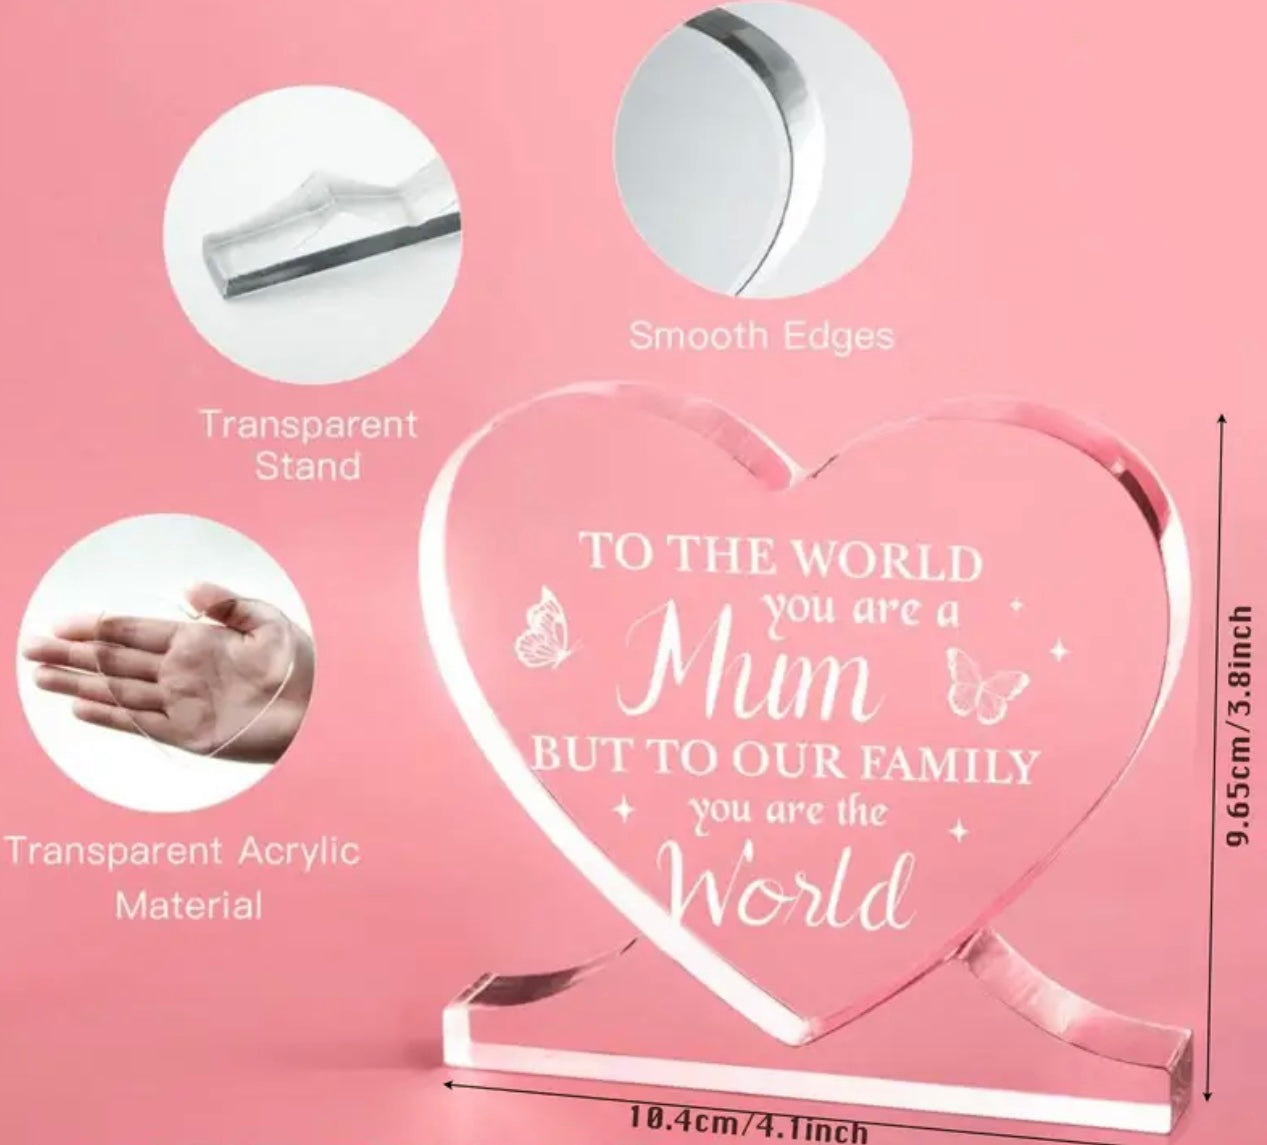 You are the world Mum - acrylic plaque